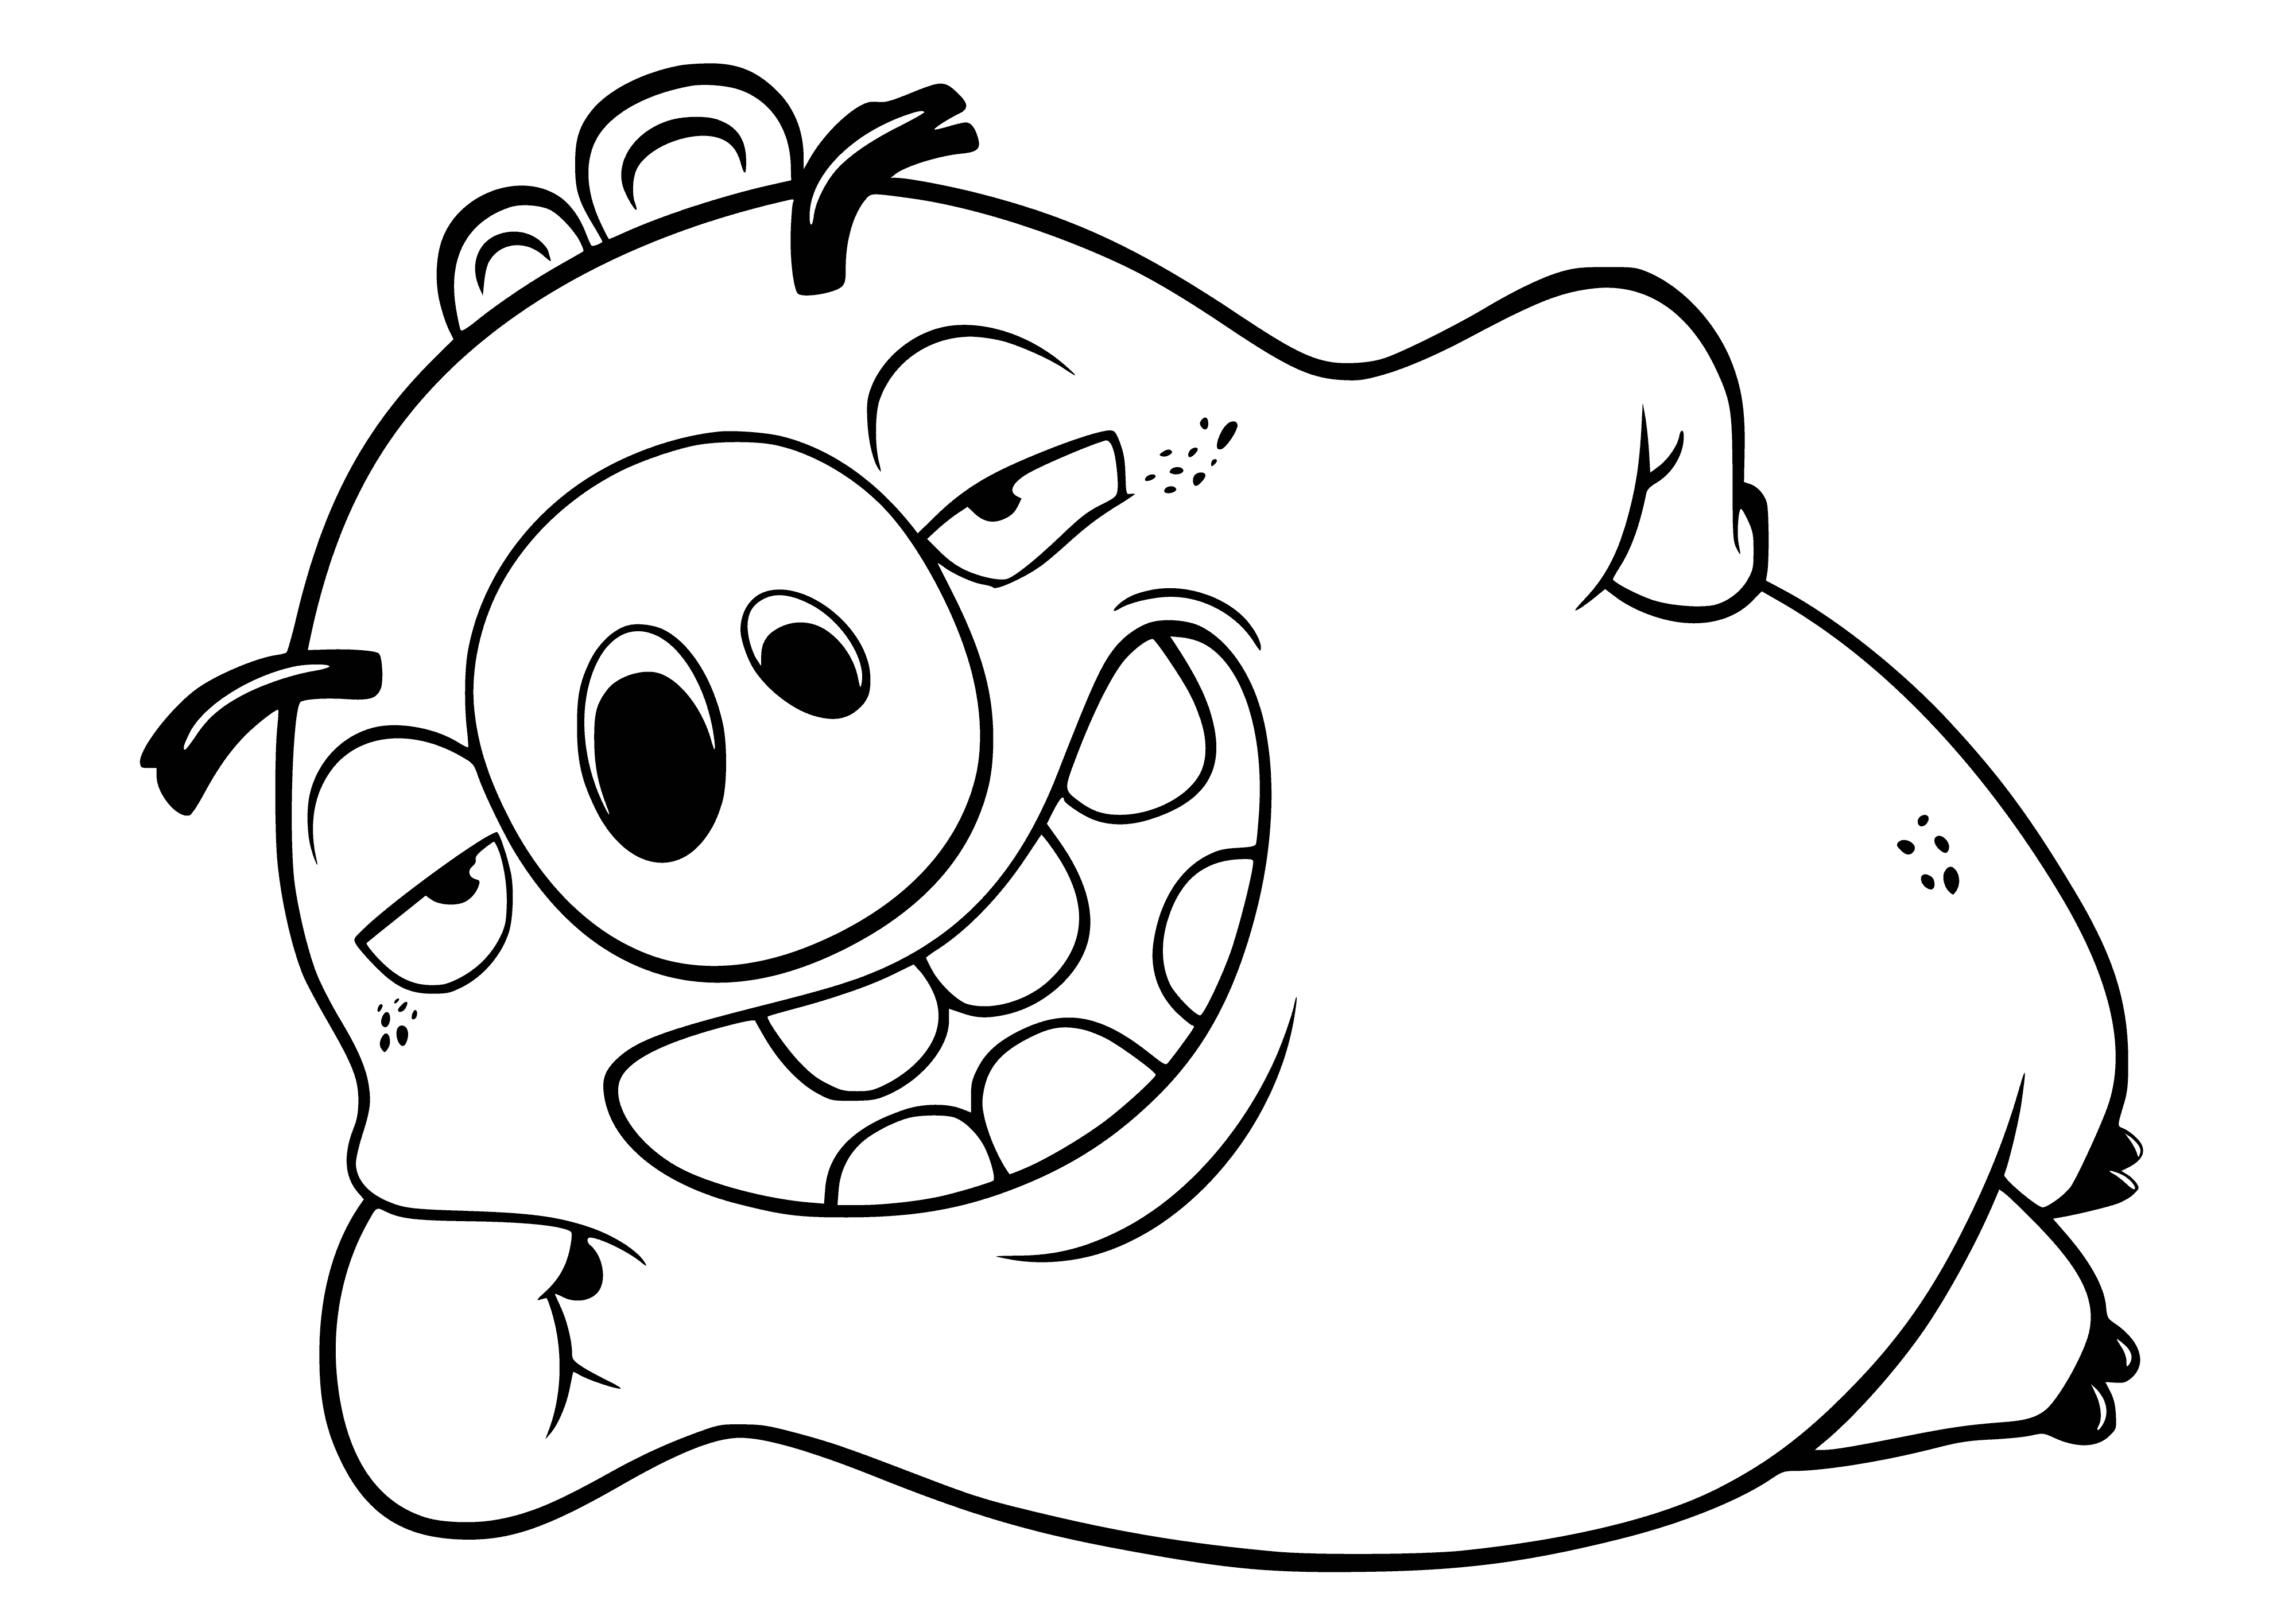 coloring page: Ross is a large, happy bird with red and yellow body, yellow beak, small black eyes and outstretched wings.